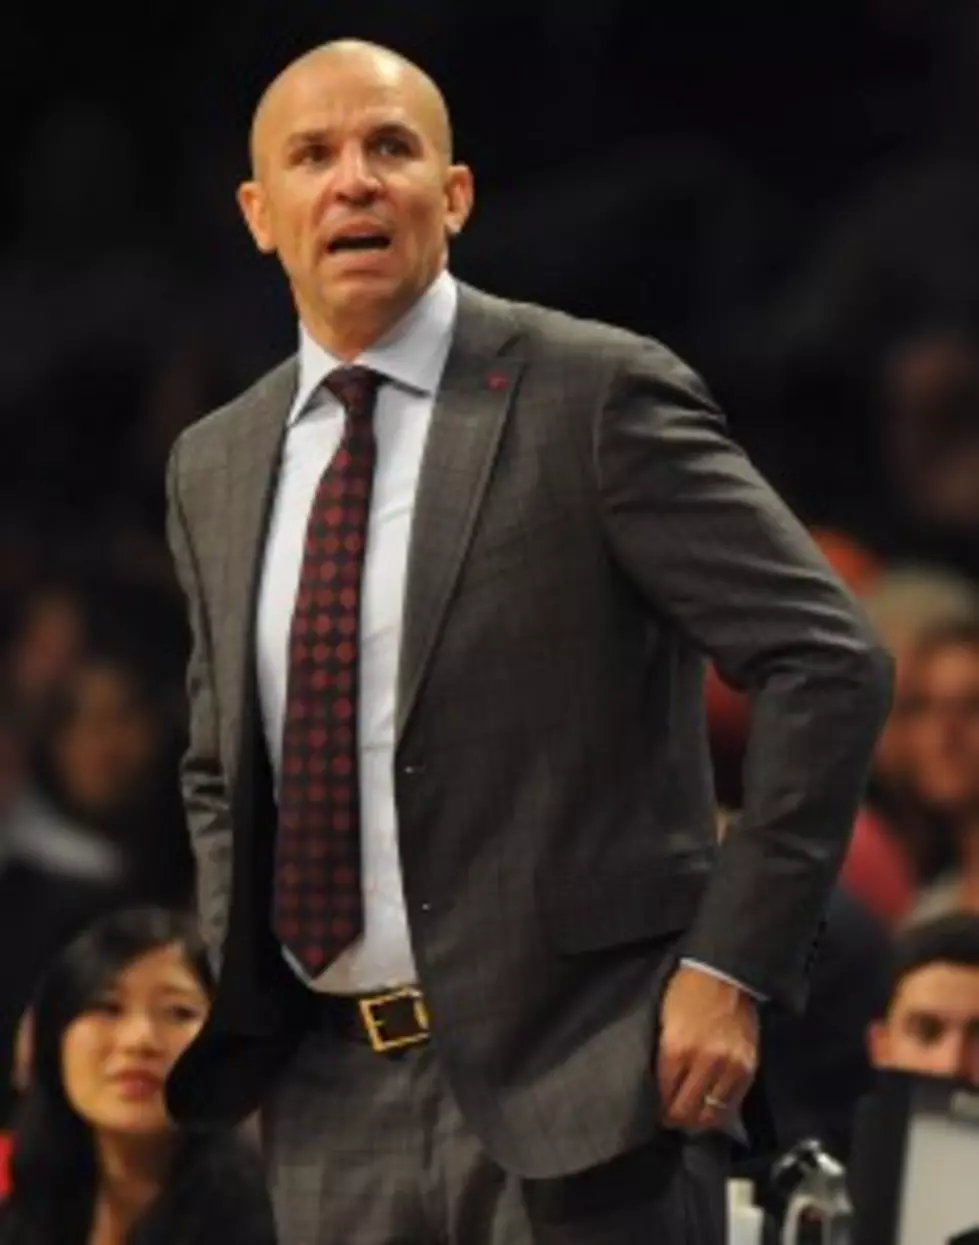 Sodagate &#8211; Did Jason Kidd Intentionally Spill His Drink To Get An Extra Timeout?